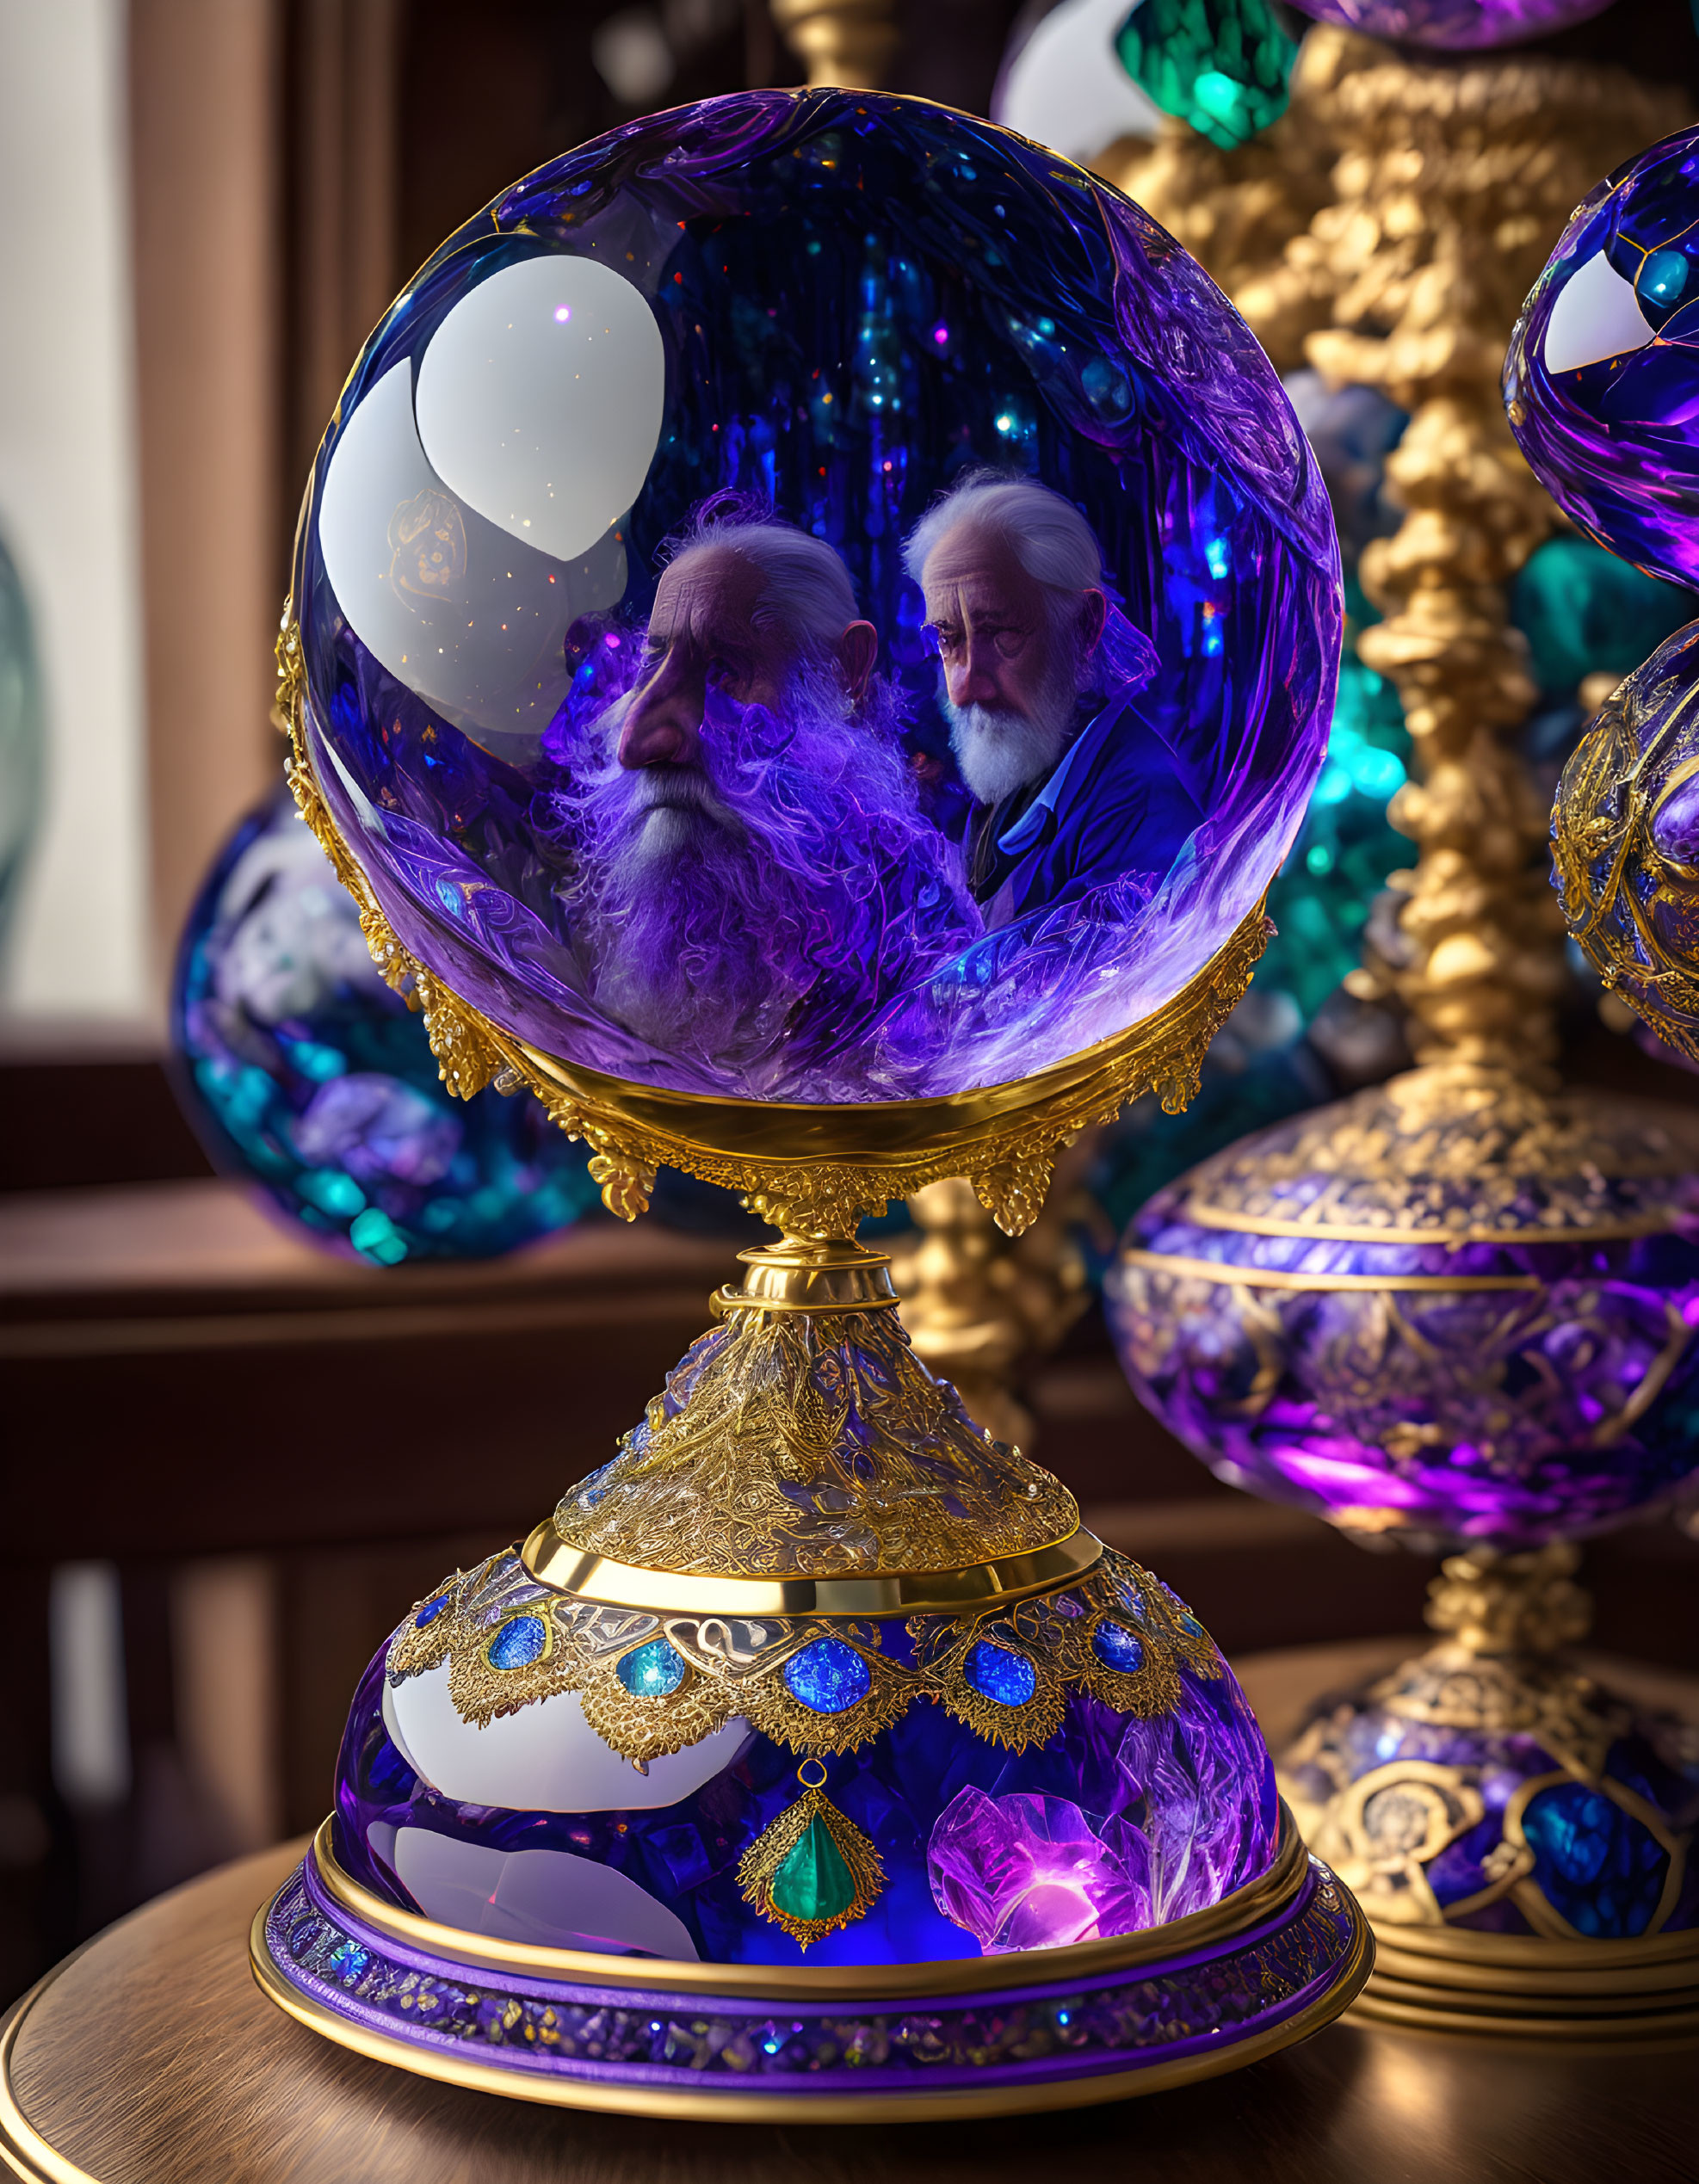 Ornate Crystal Ball with Wizards and Mystical Energy